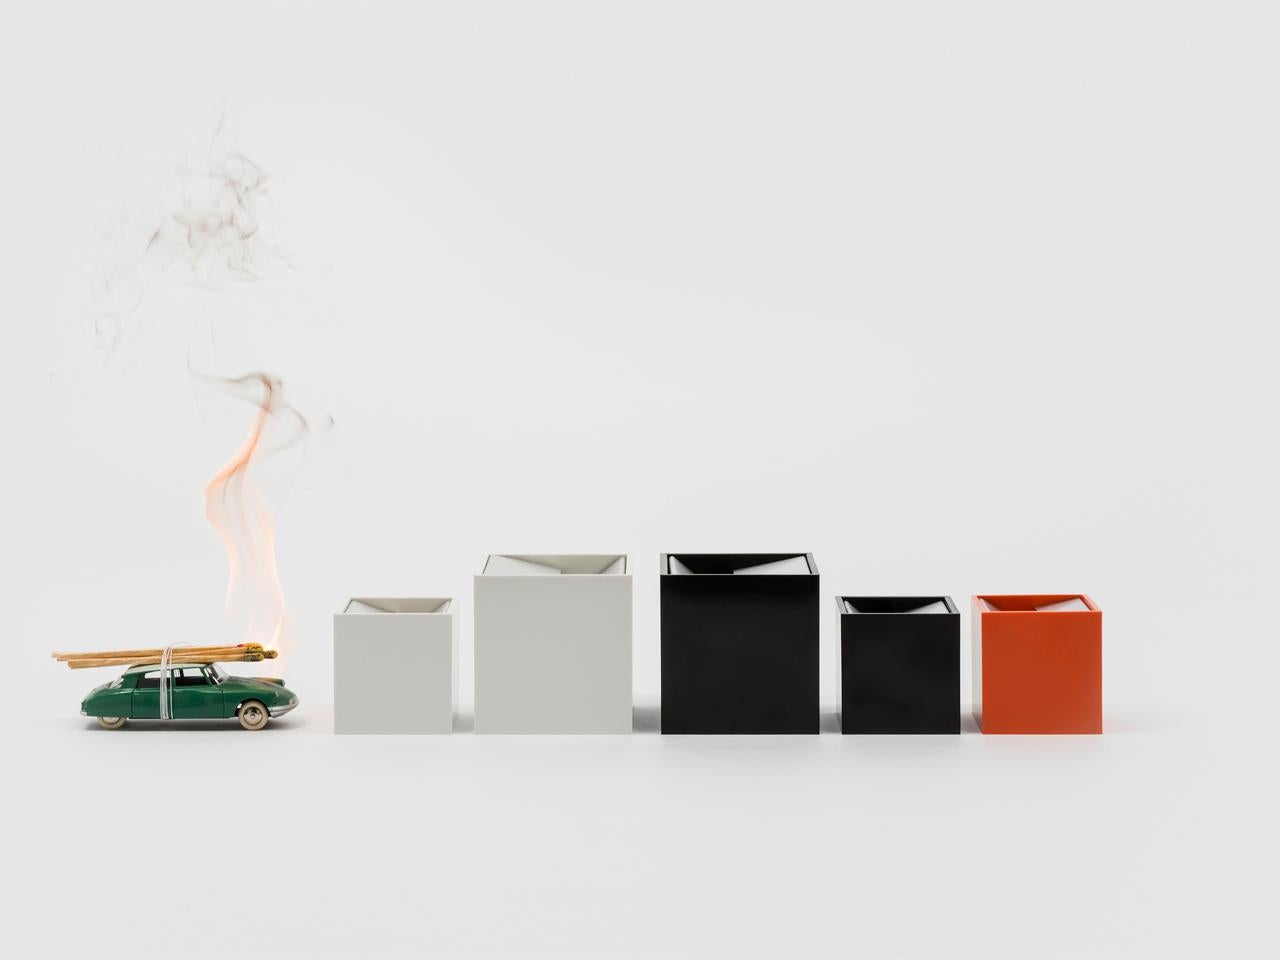 Small Black Cubo is an ashtray made up of two simple elements: a cube shaped shell open on one side contains an element made of bent sheet metal. This element is designed so that the acute angle of one end of the sheet makes the ash fall inside